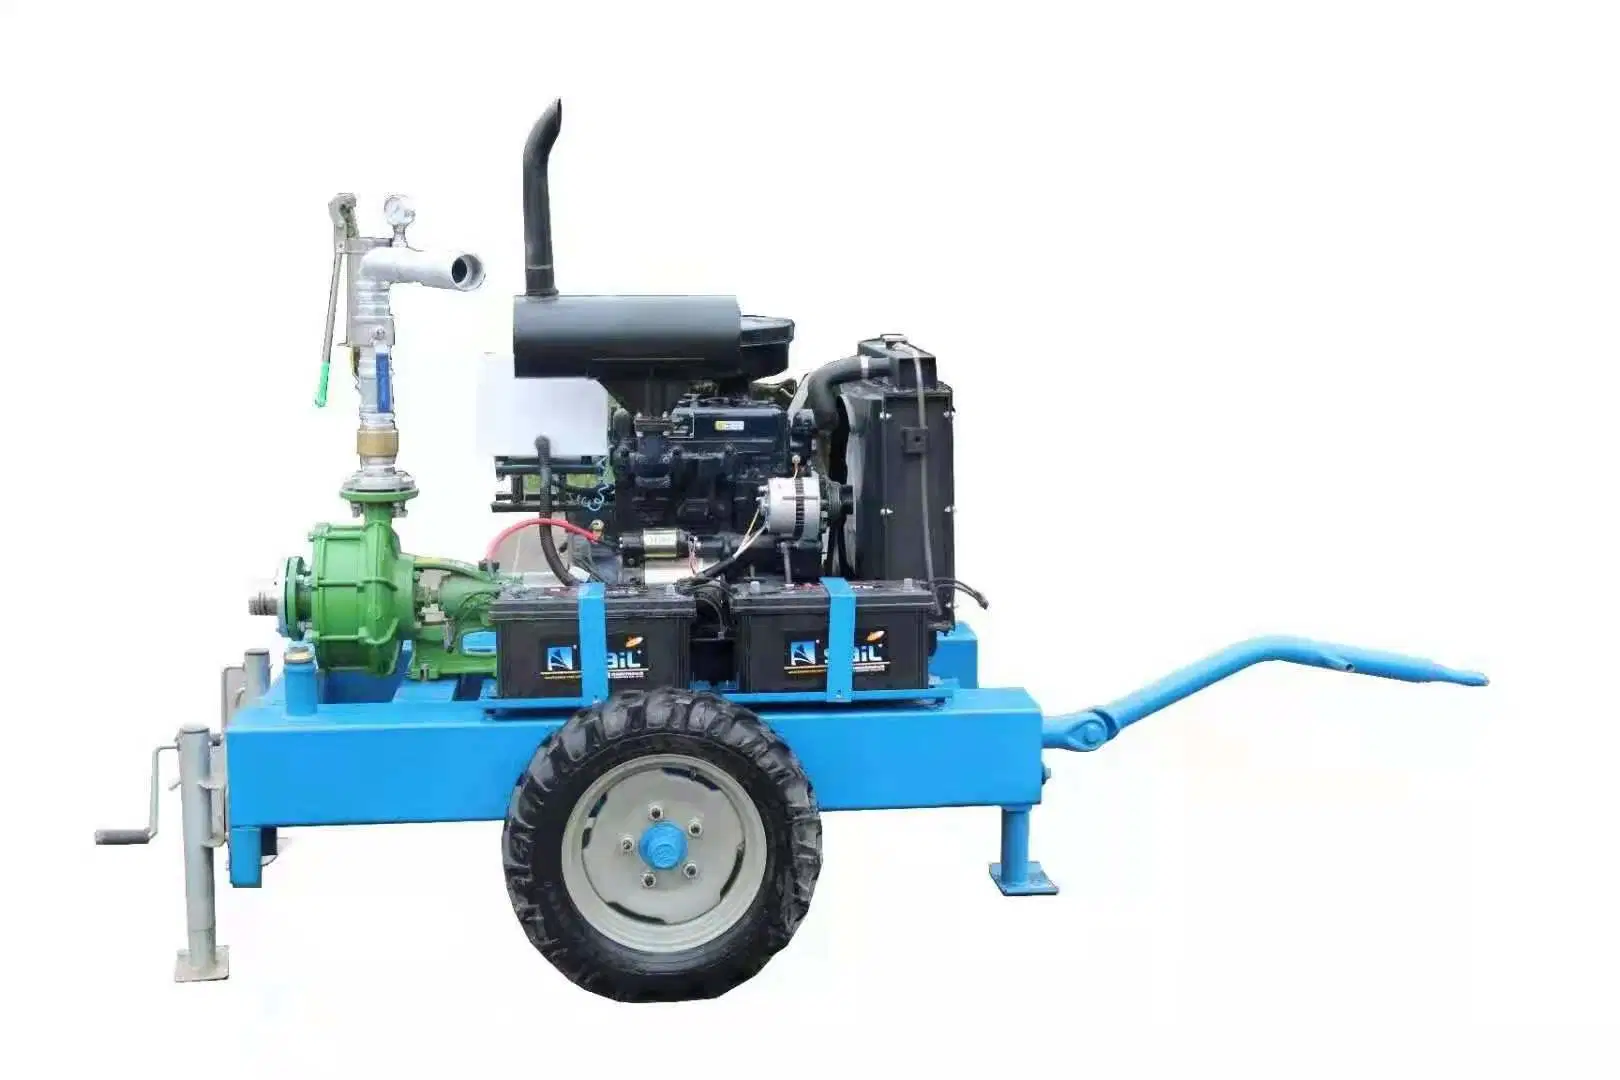 Hose Reel Irrigation System Set up with Water Pump